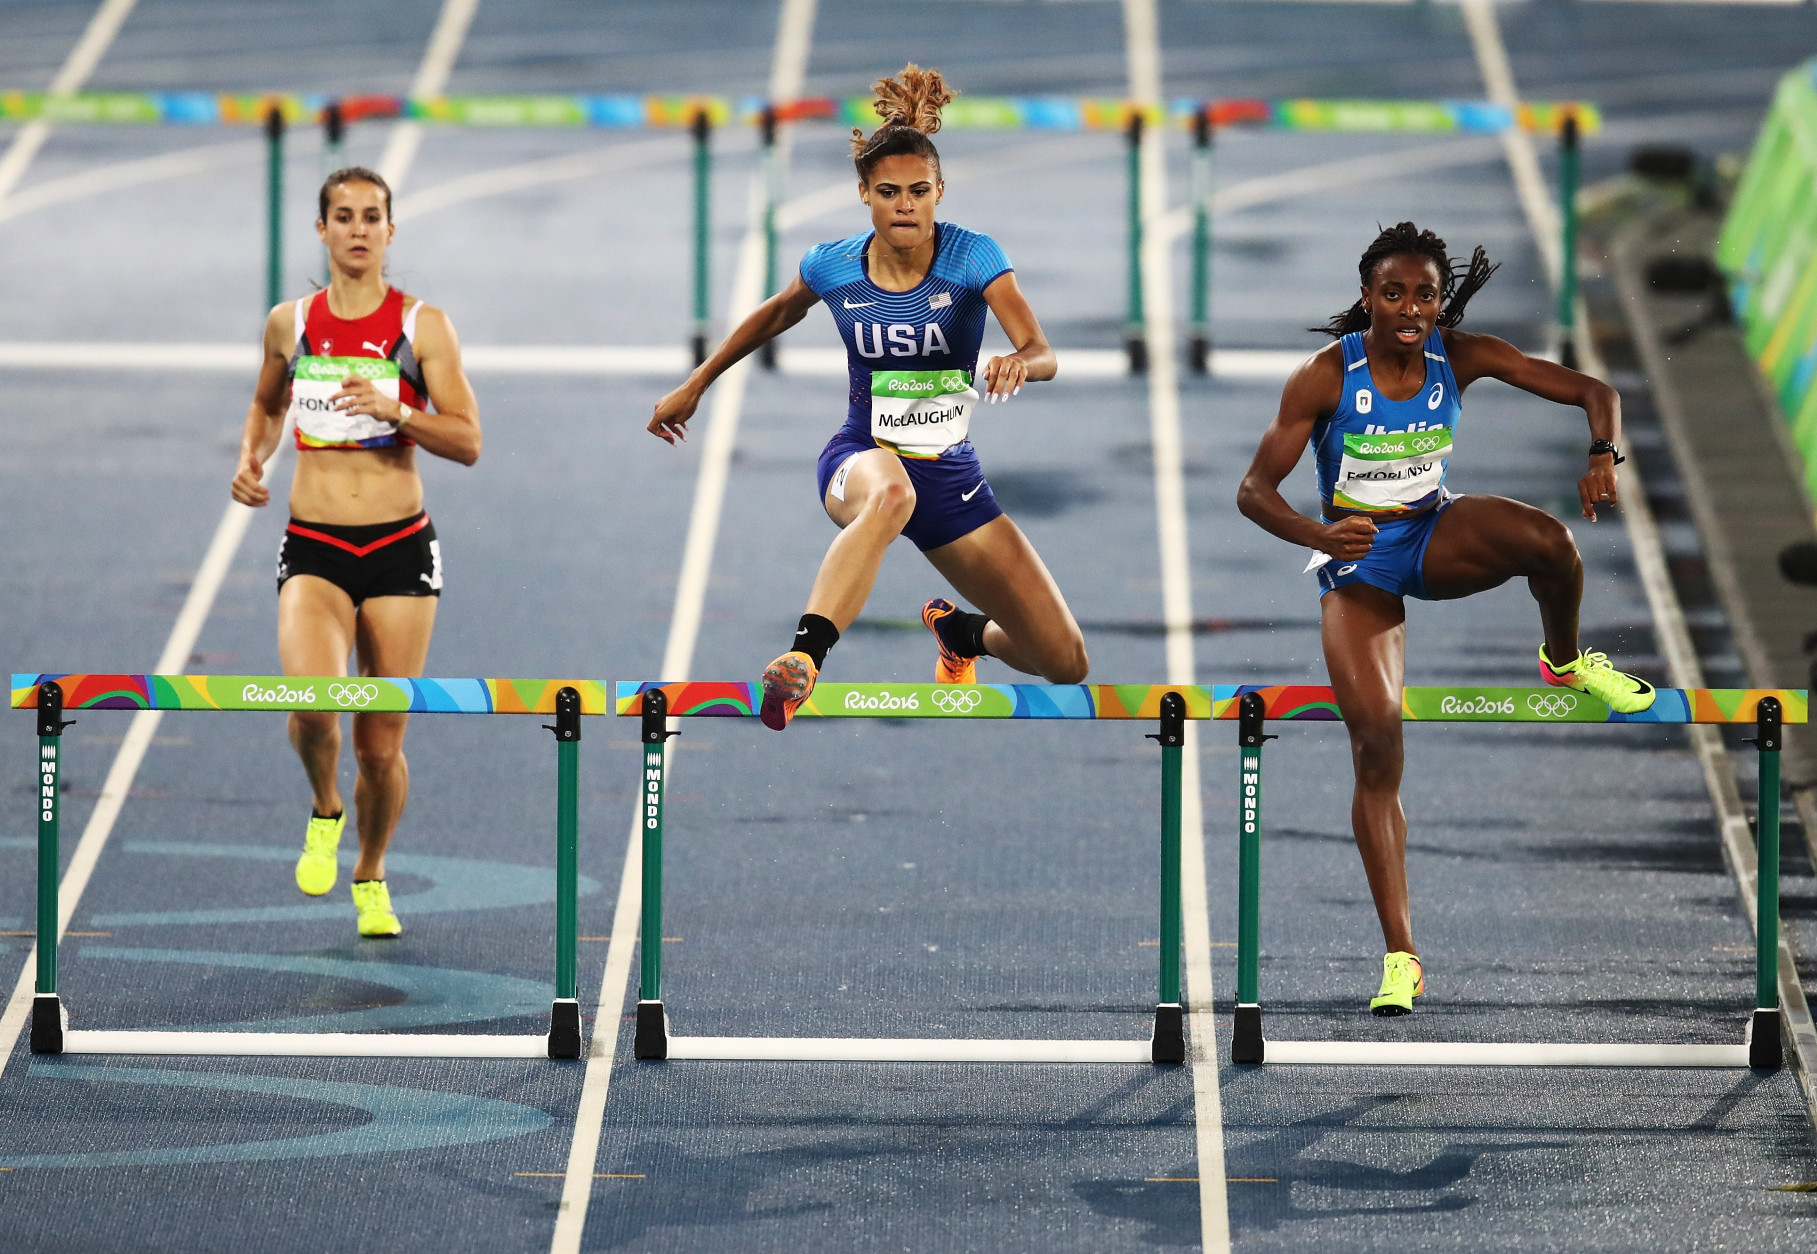 RIO DE JANEIRO, BRAZIL - AUGUST 15:  Sydney McLaughlin of the United States (C) competes during the Women's 400m Hurdles Round 1 - Heat 1 on Day 10 of the Rio 2016 Olympic Games at the Olympic Stadium on August 15, 2016 in Rio de Janeiro, Brazil.  (Photo by Cameron Spencer/Getty Images)